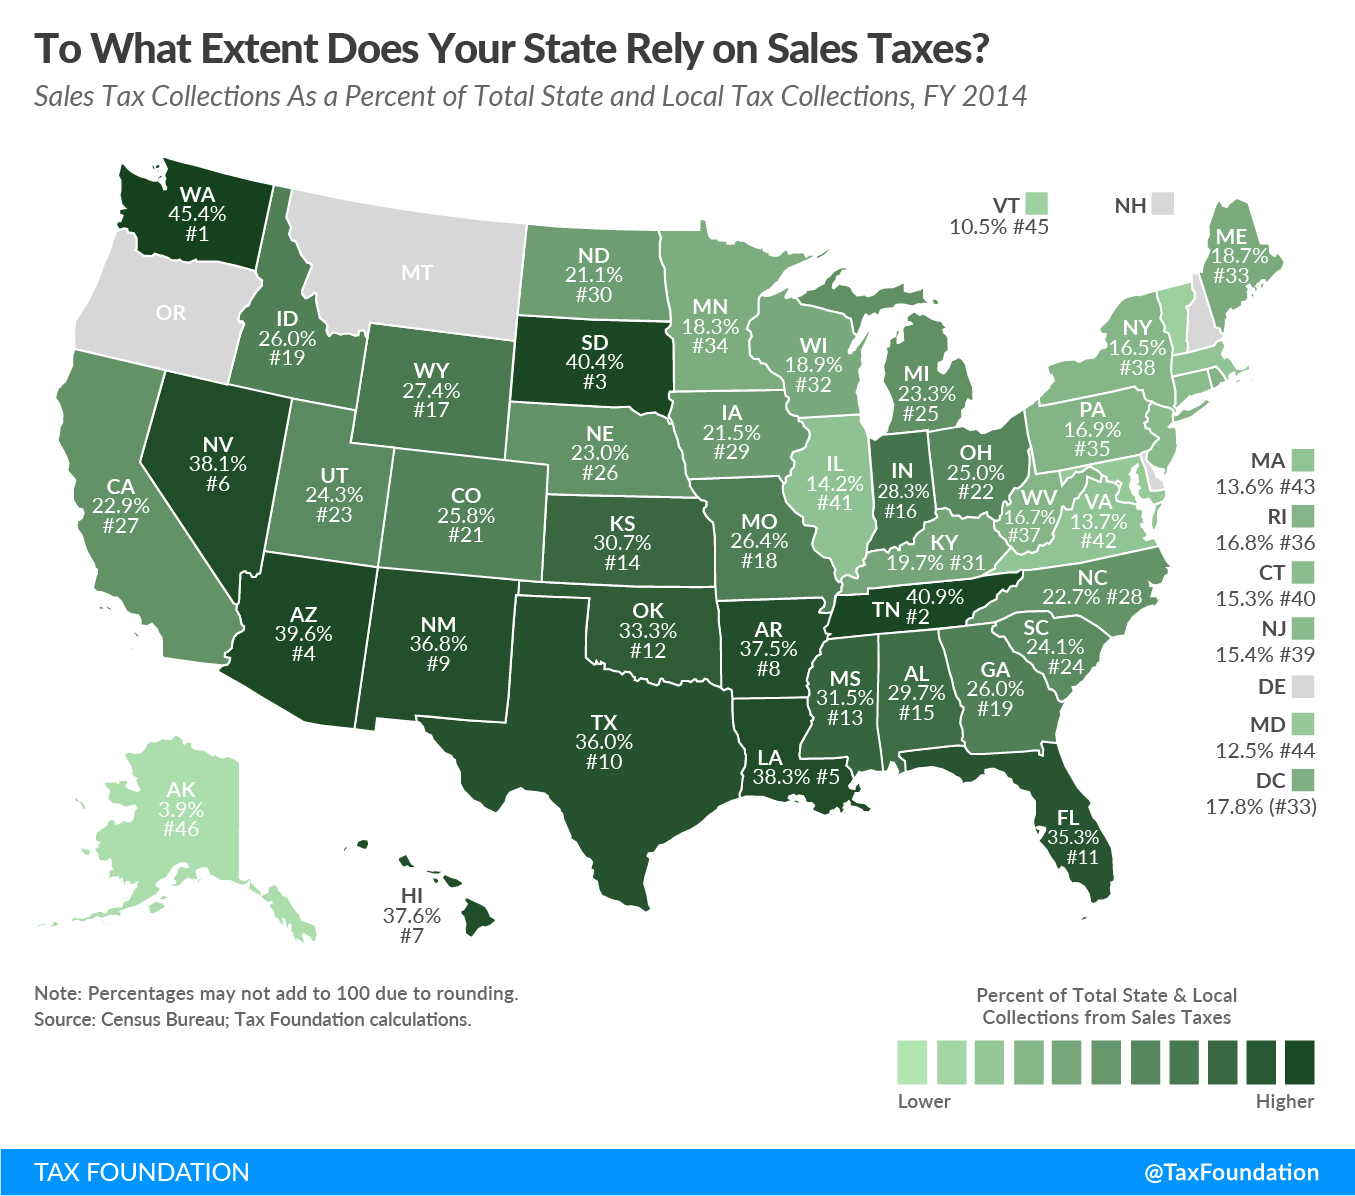 Sales tax collections